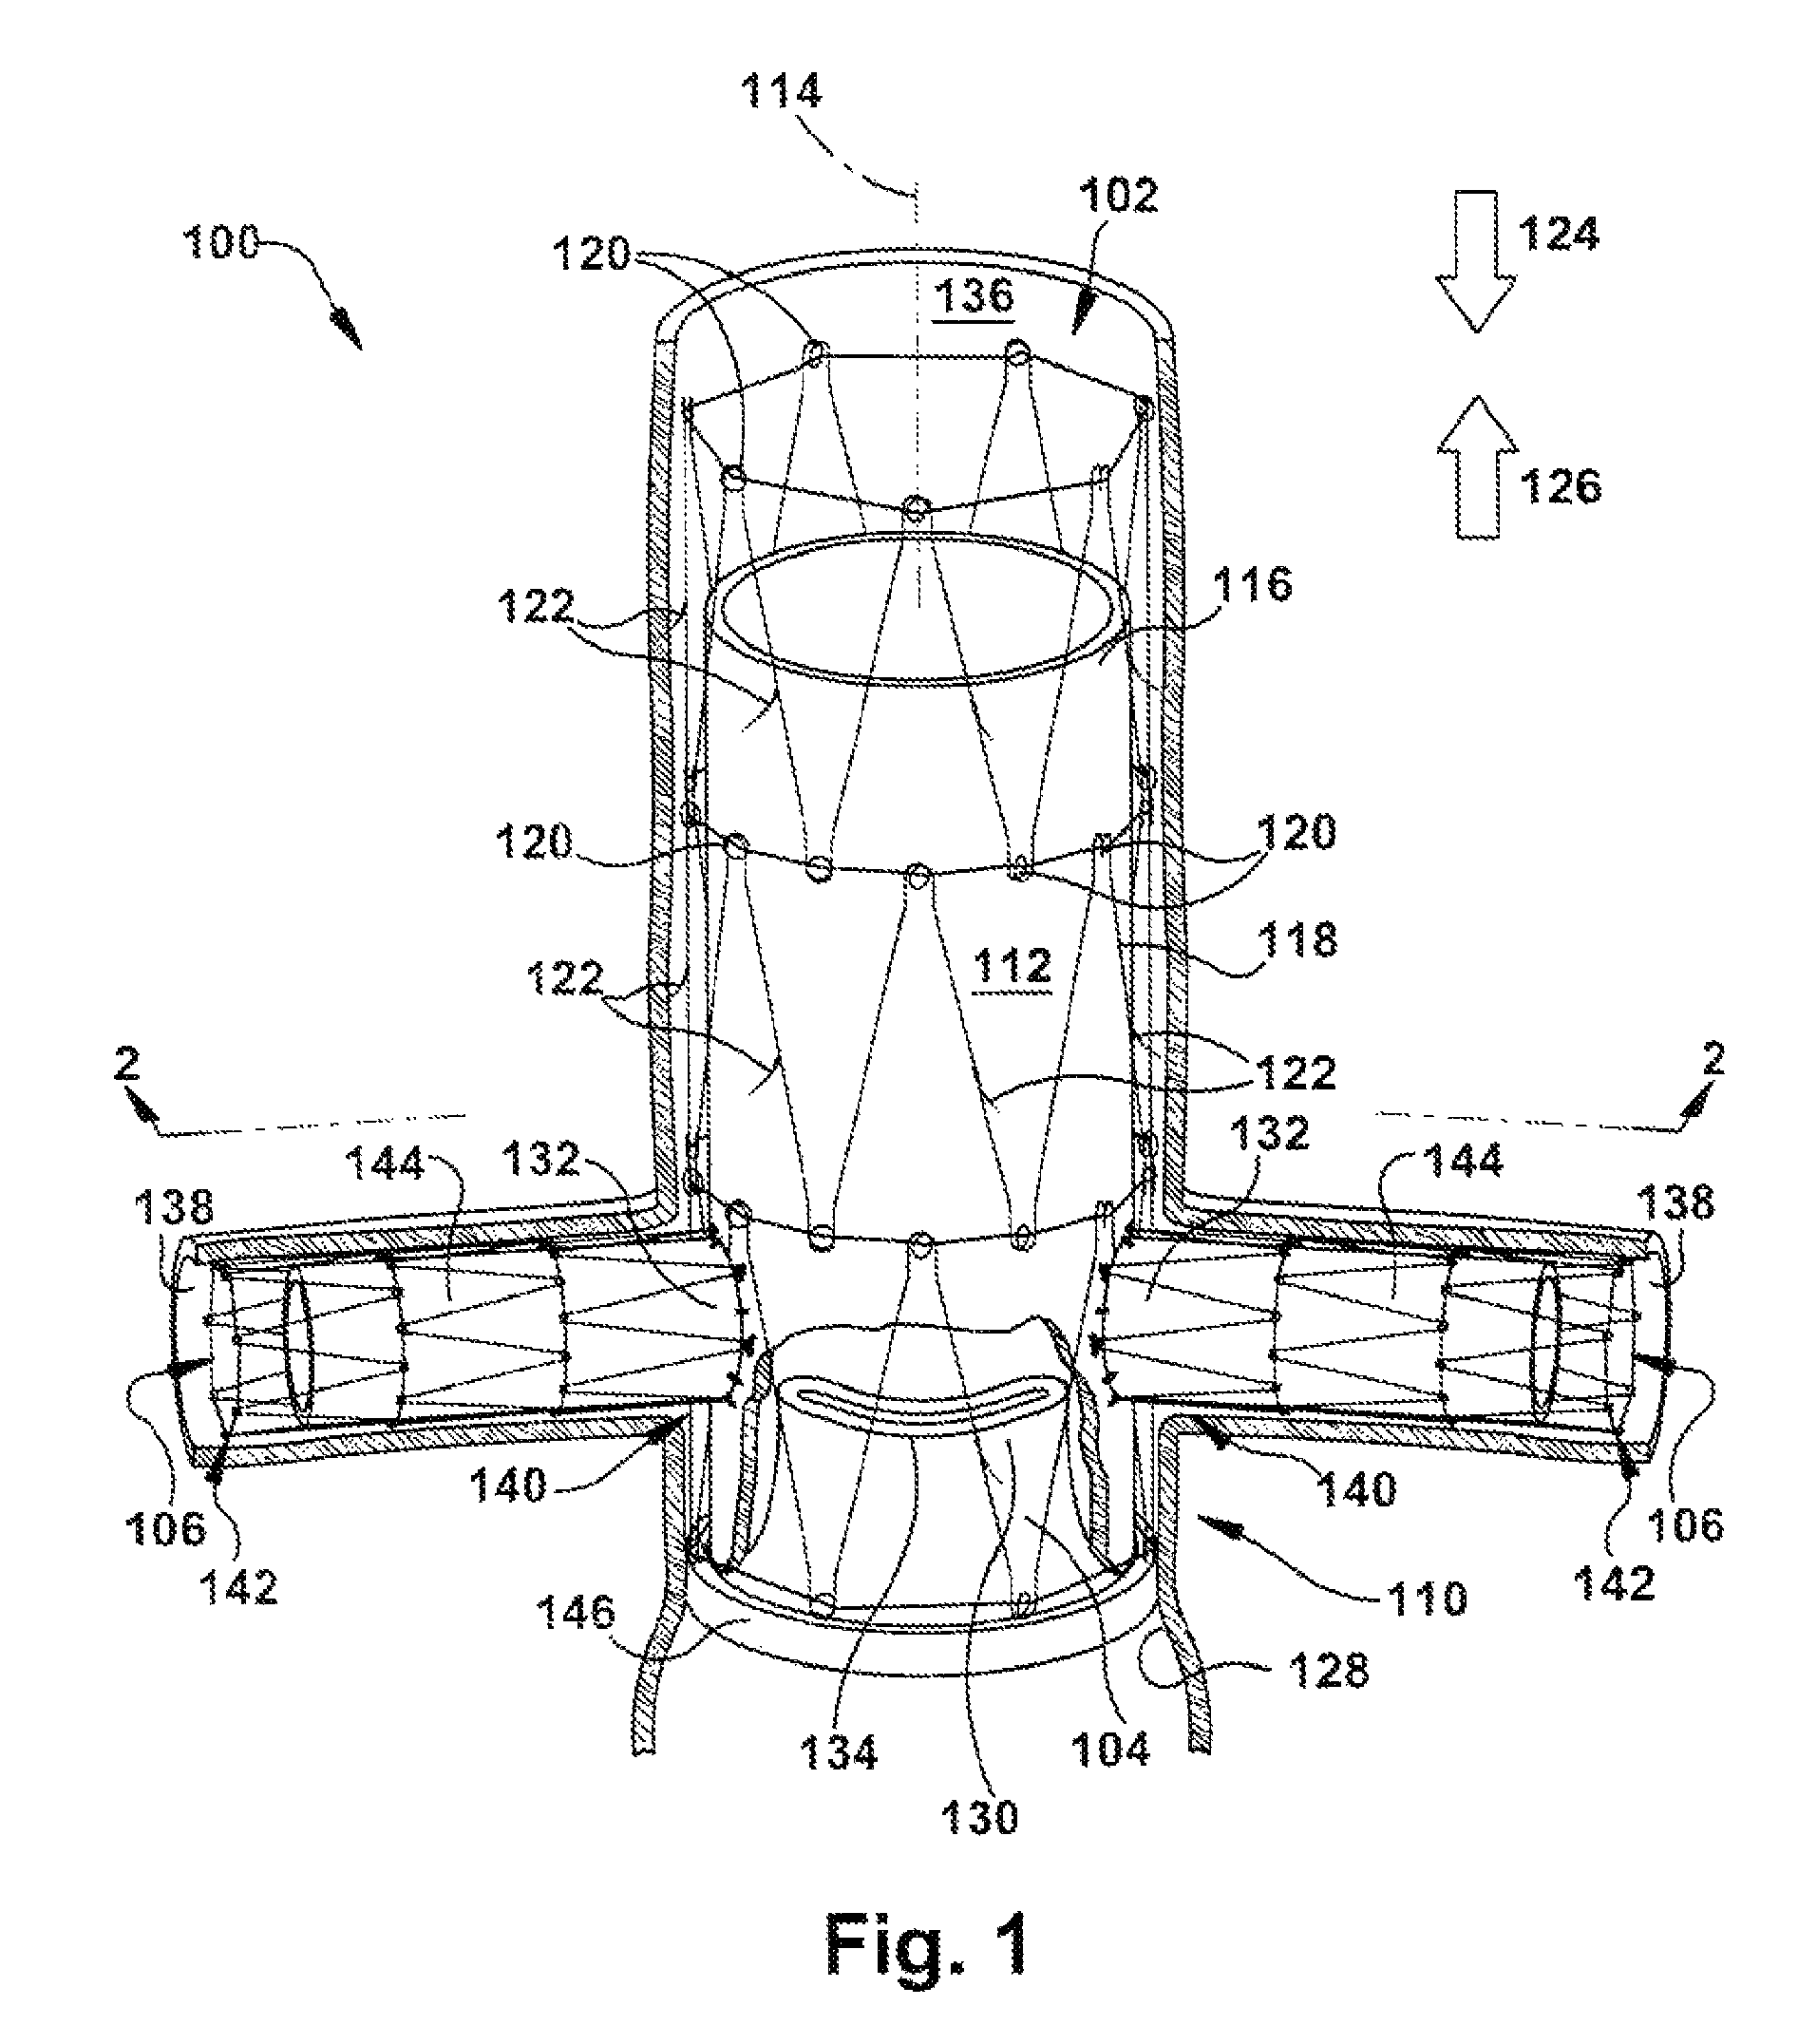 Apparatus for repairing the function of a native aortic valve